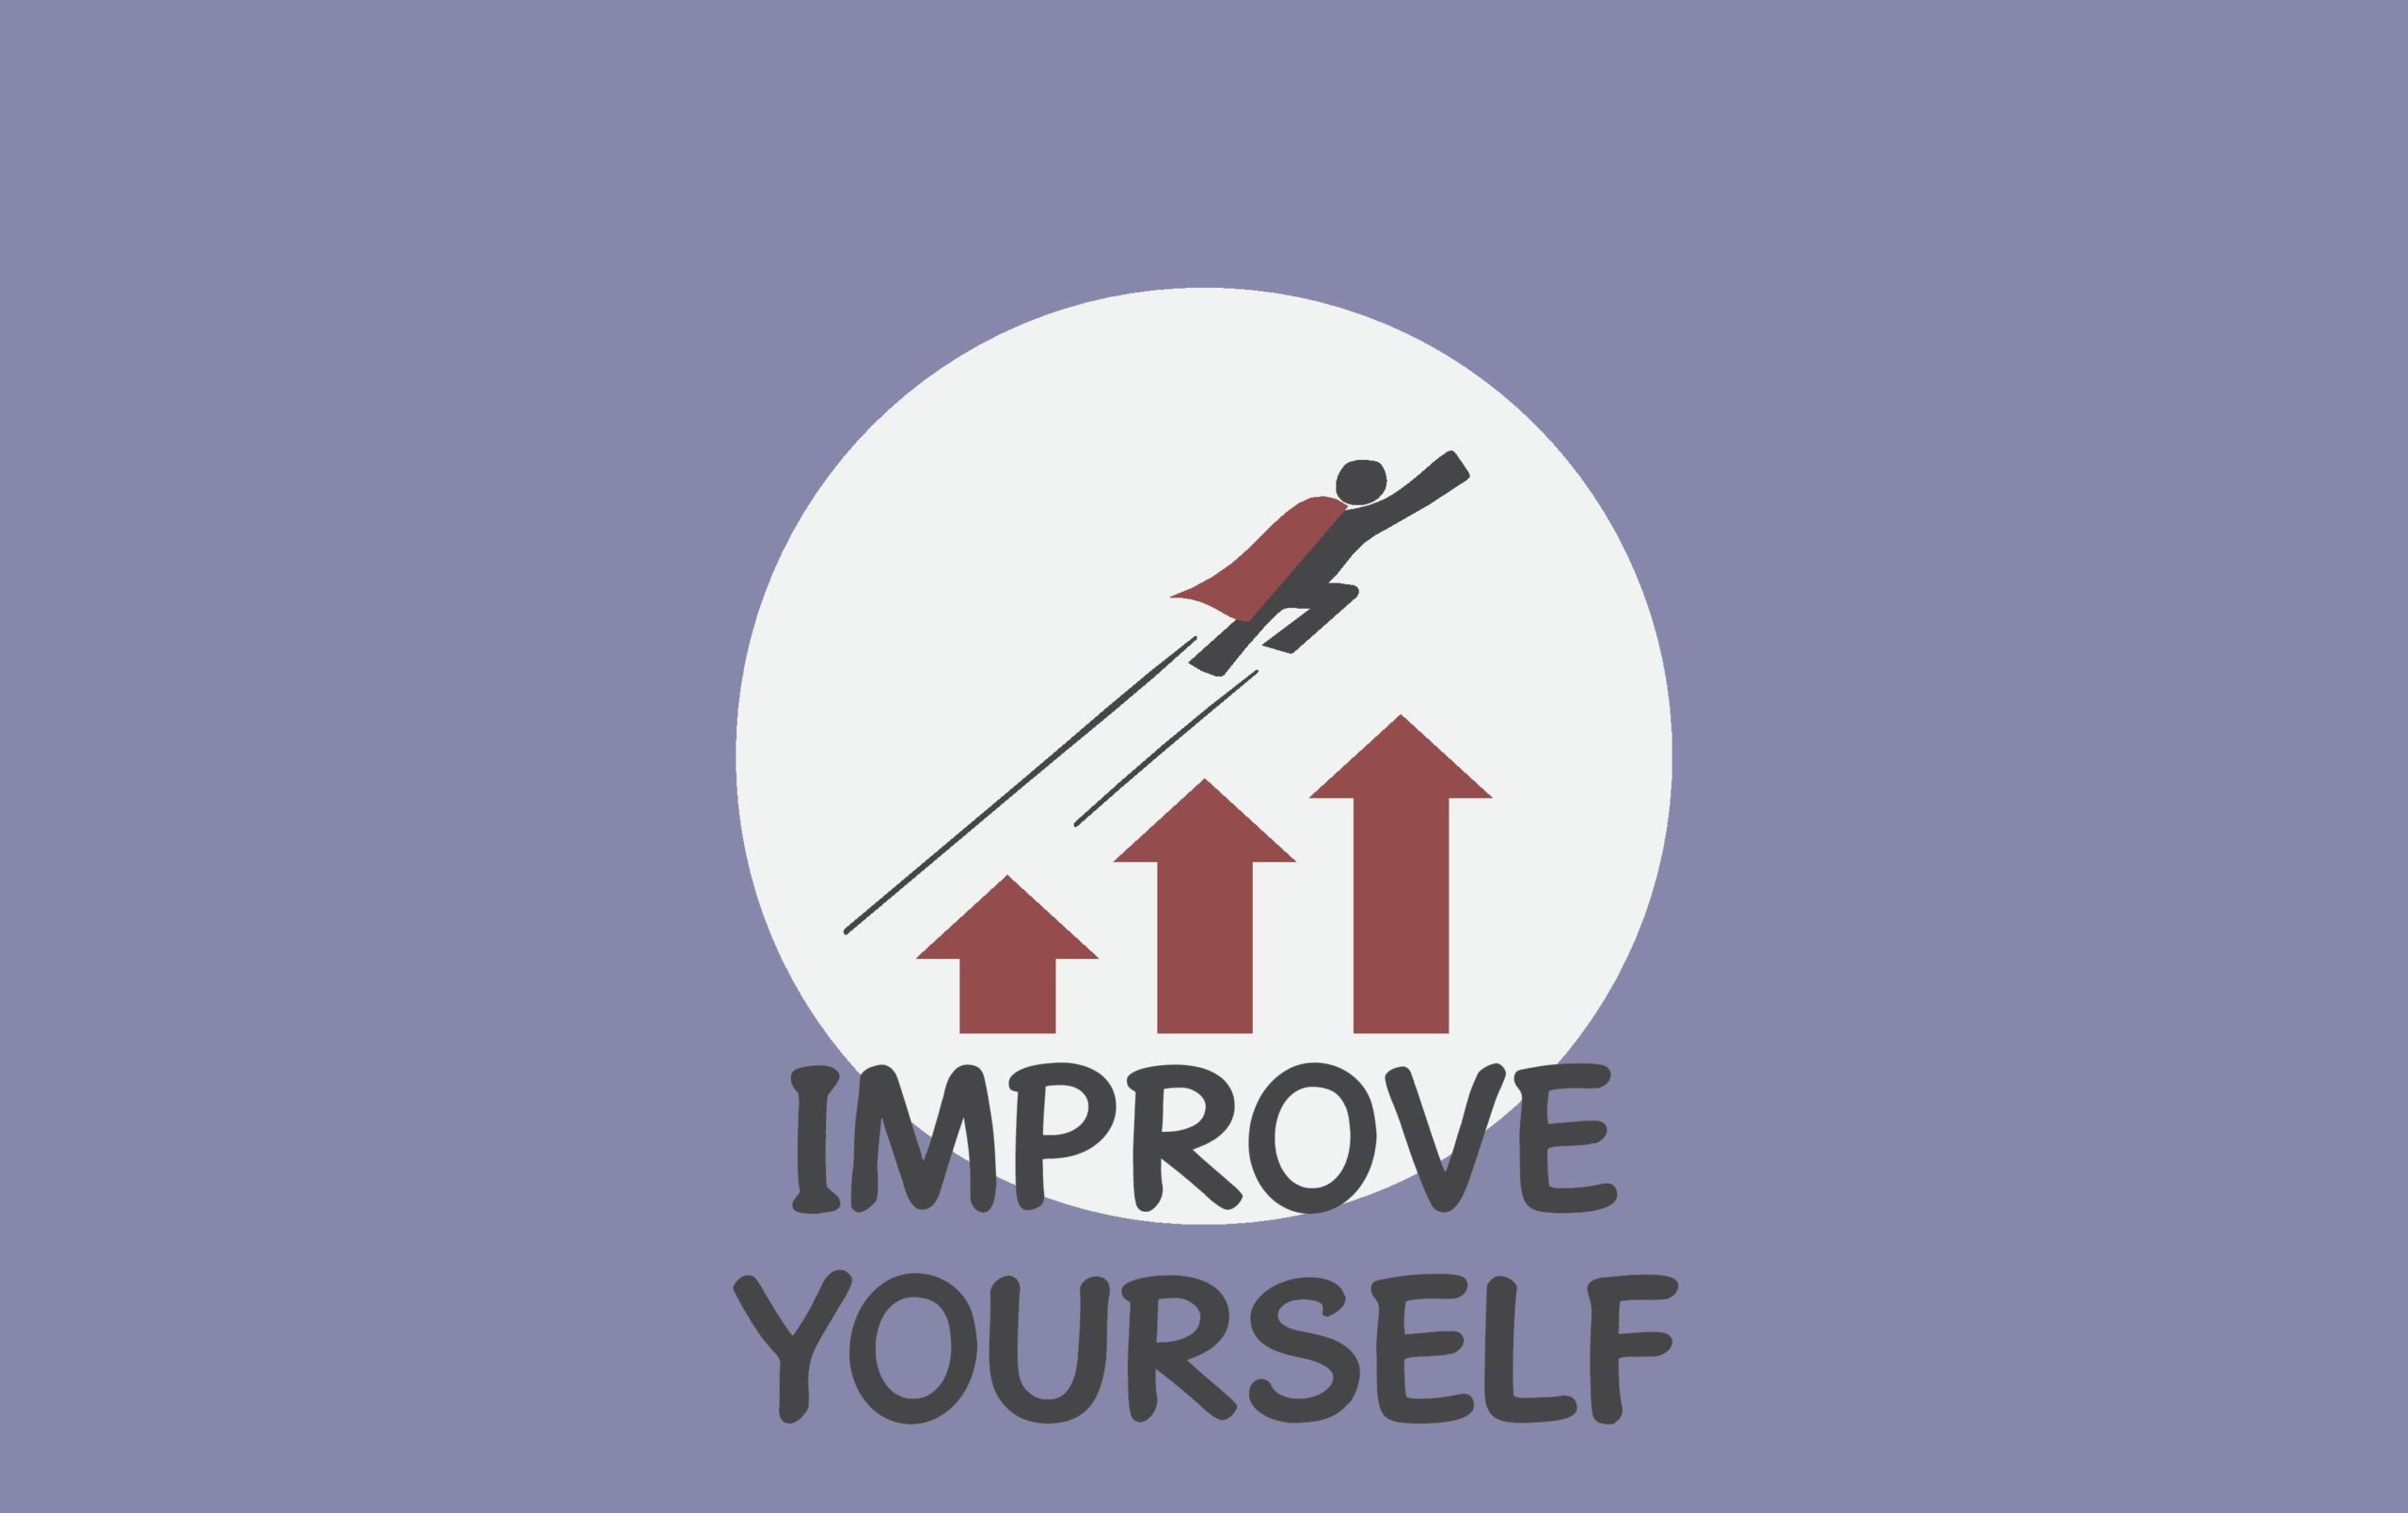 What did you do Today to Improve Yourself?